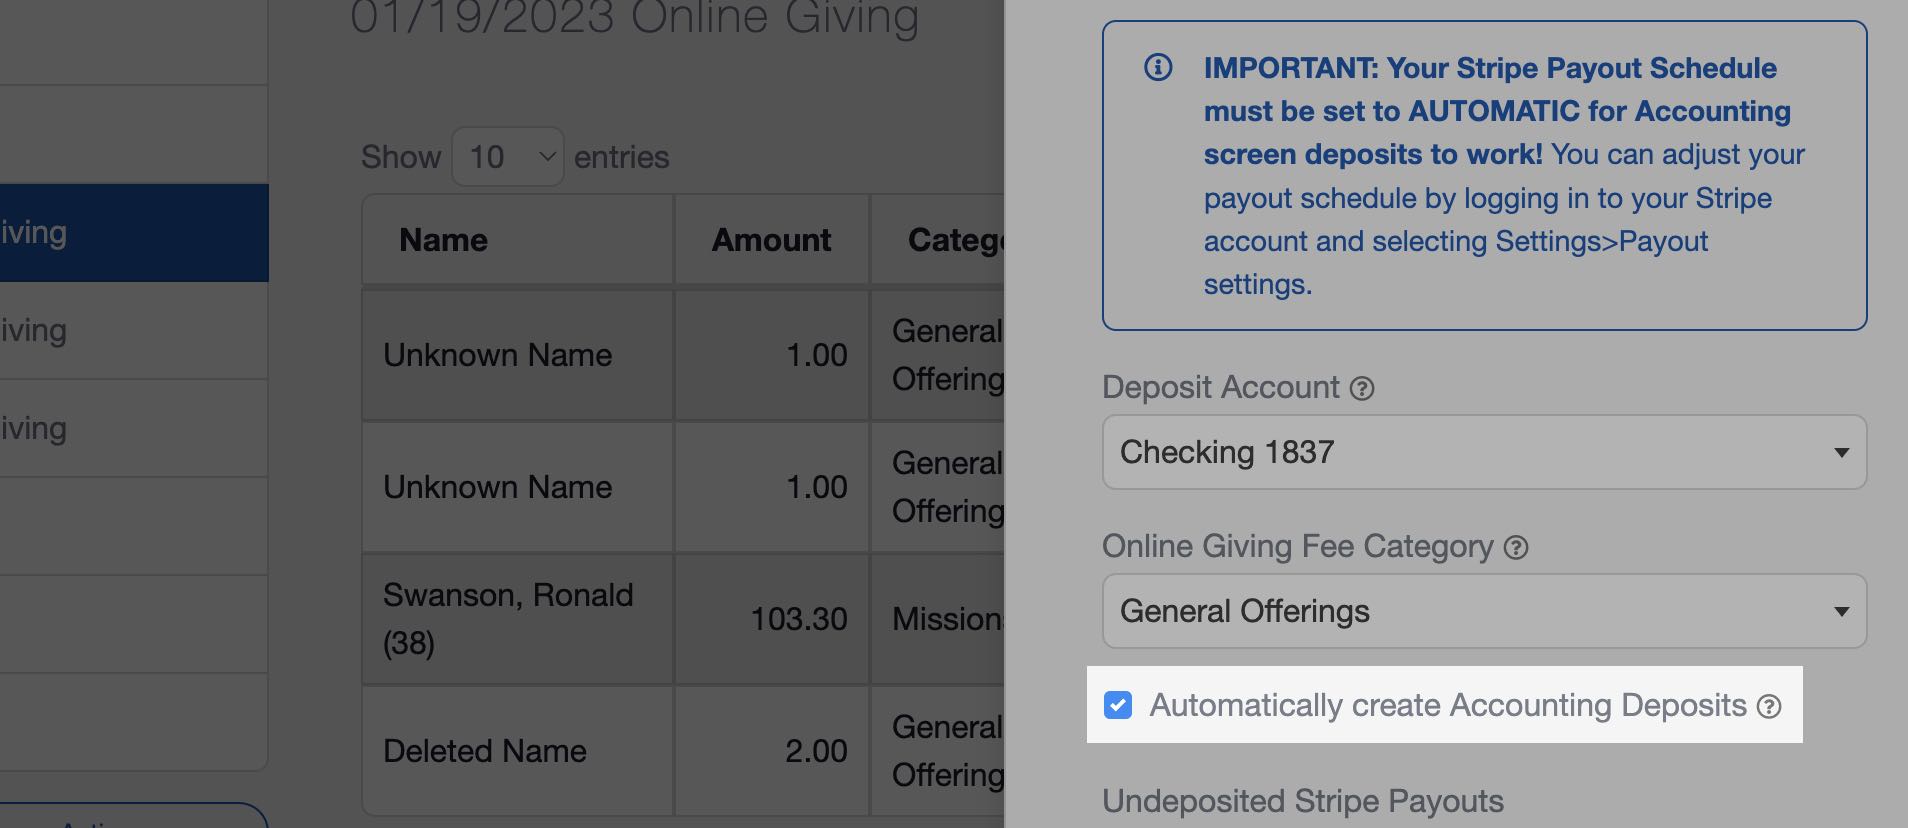  Automatically Create church accounting deposits from online donations